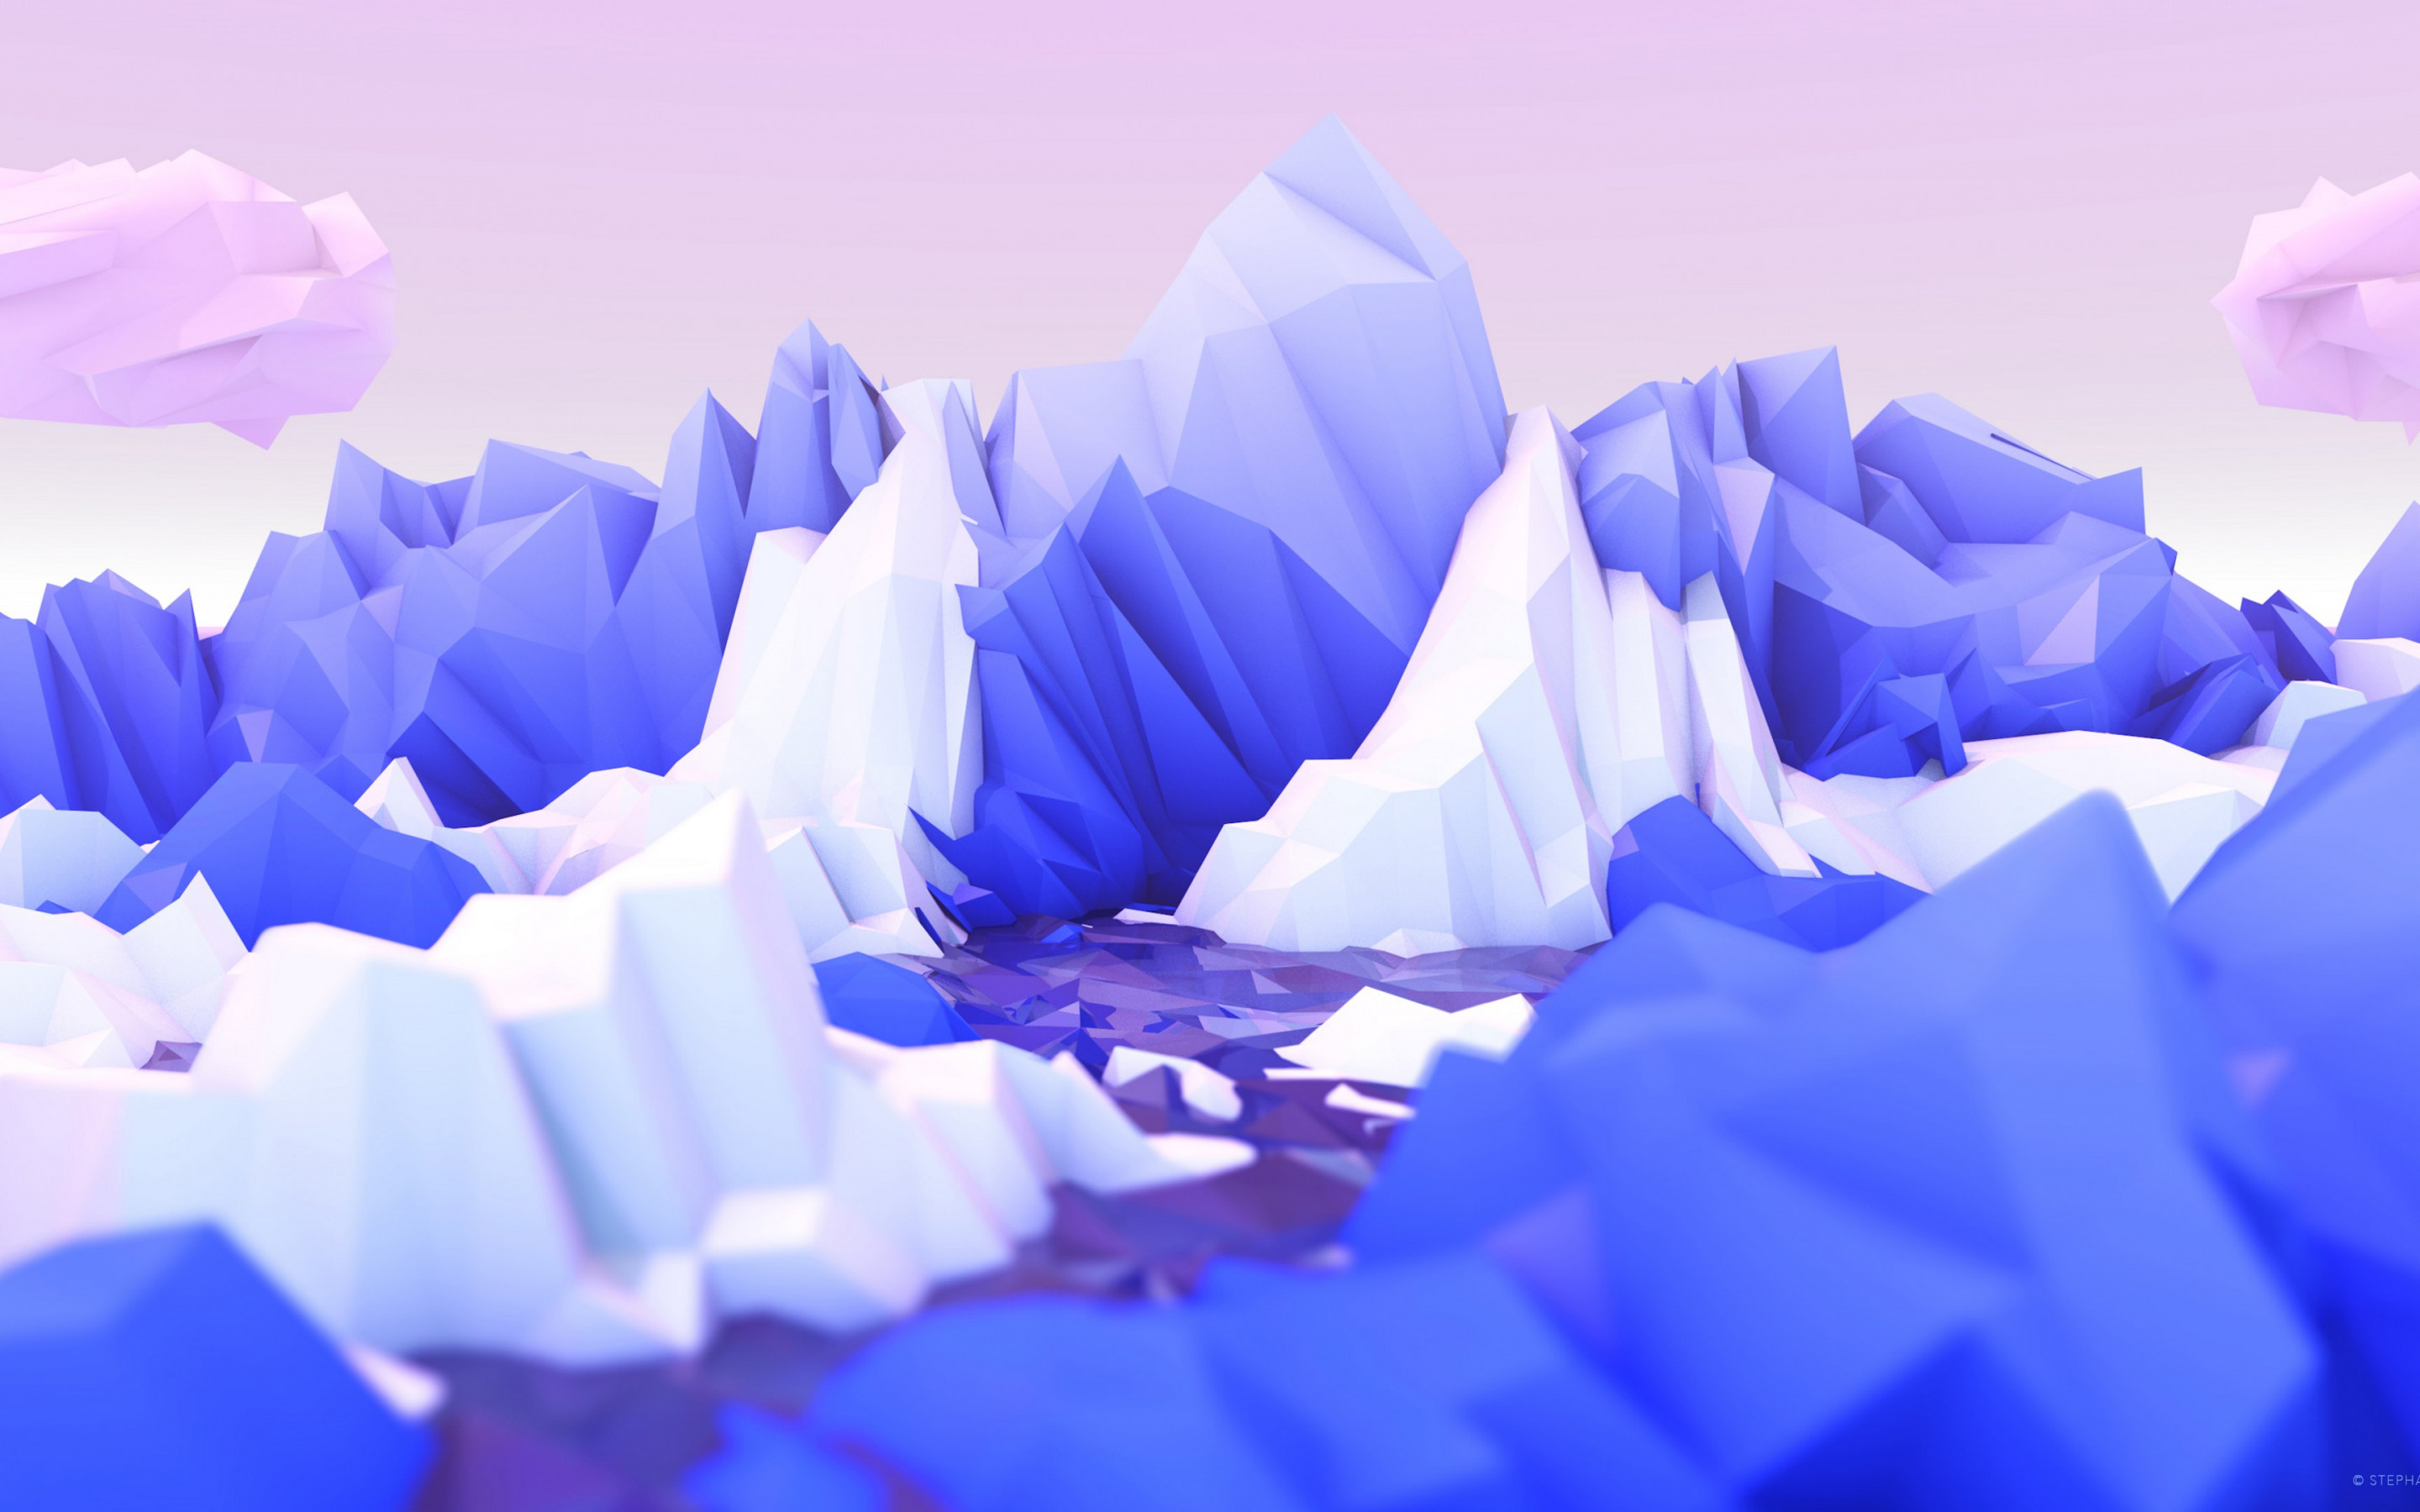 Low poly graphic design wallpaper 2880x1800